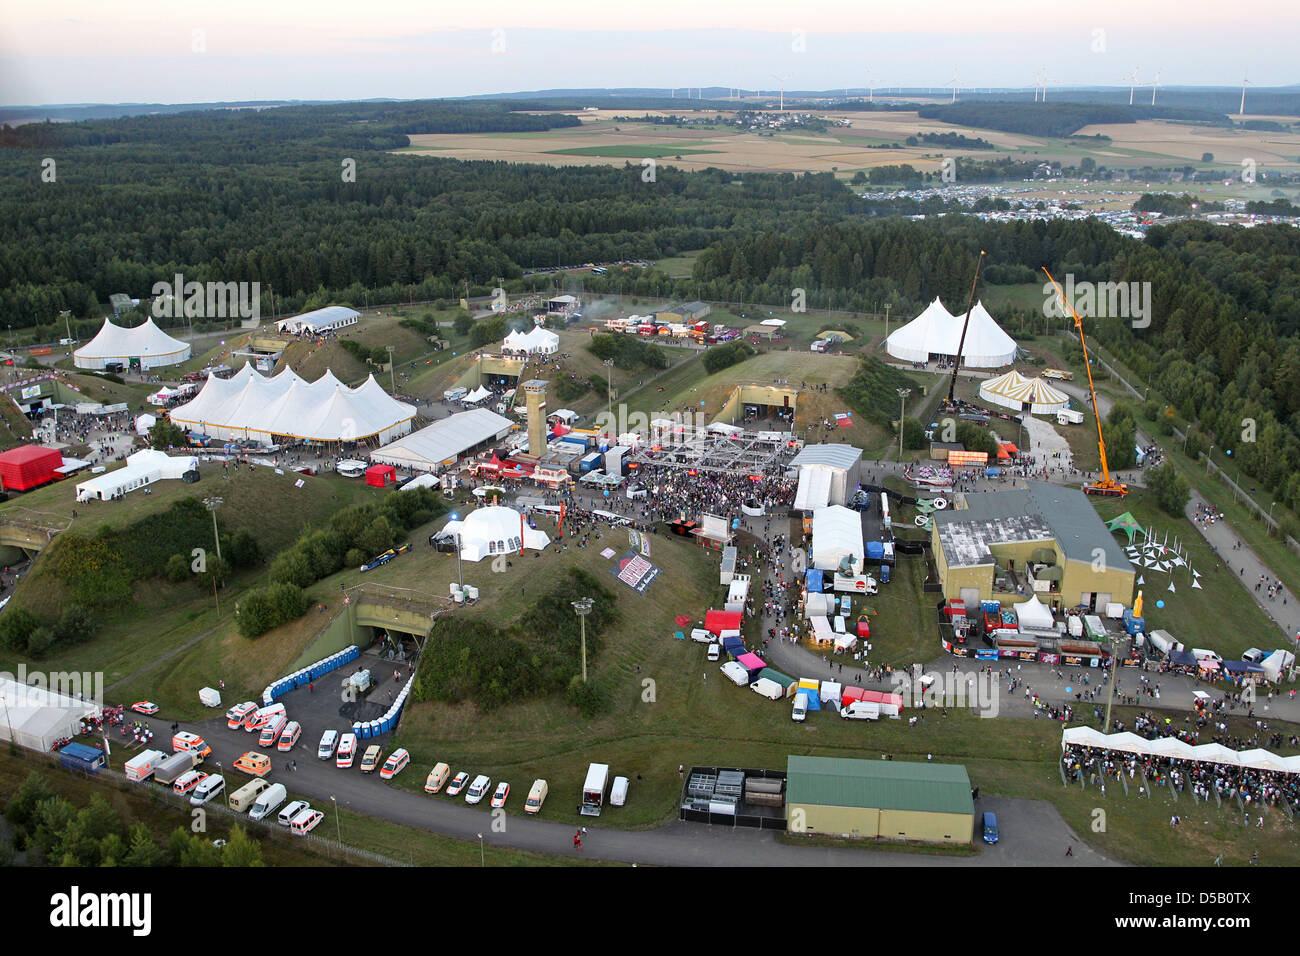 Festival Nature One 2010 Kastellaun High Resolution Stock Photography and  Images - Alamy